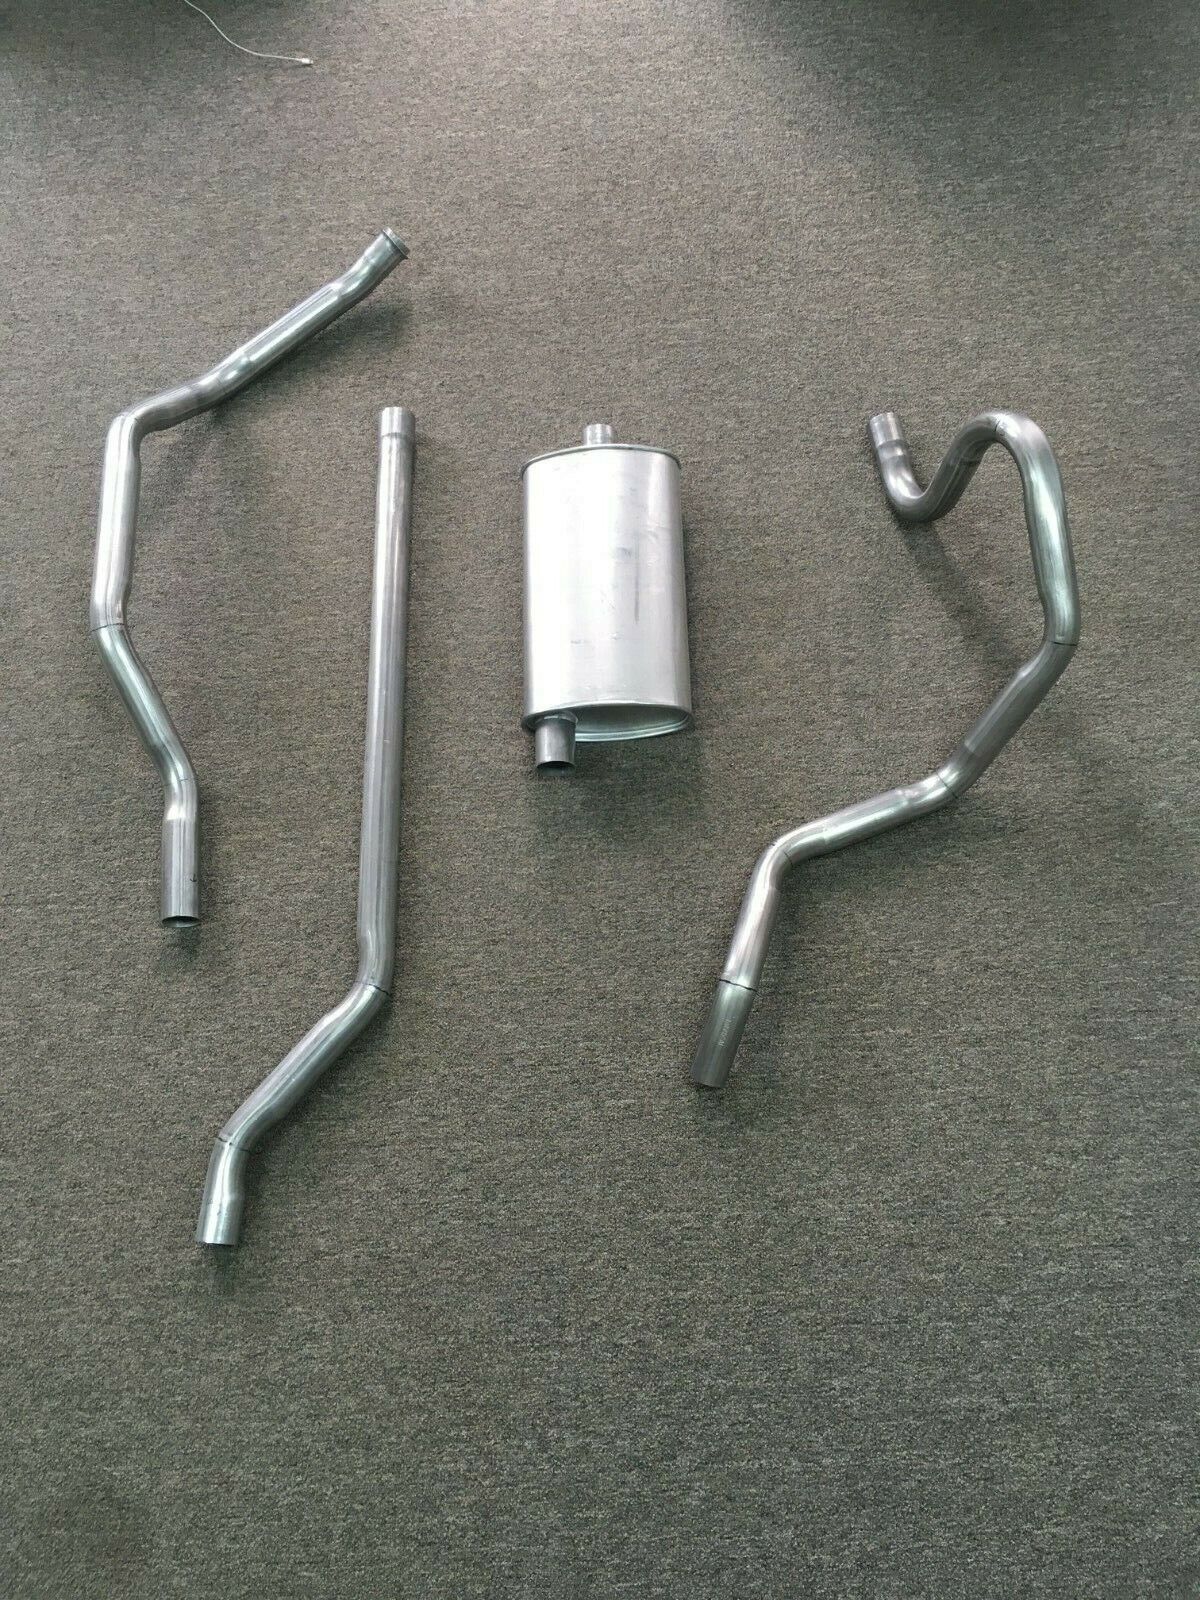 1965, 1966, 1967 Chevy Impala, Biscayne & Bel Air 6 Cylinder Exhaust System 